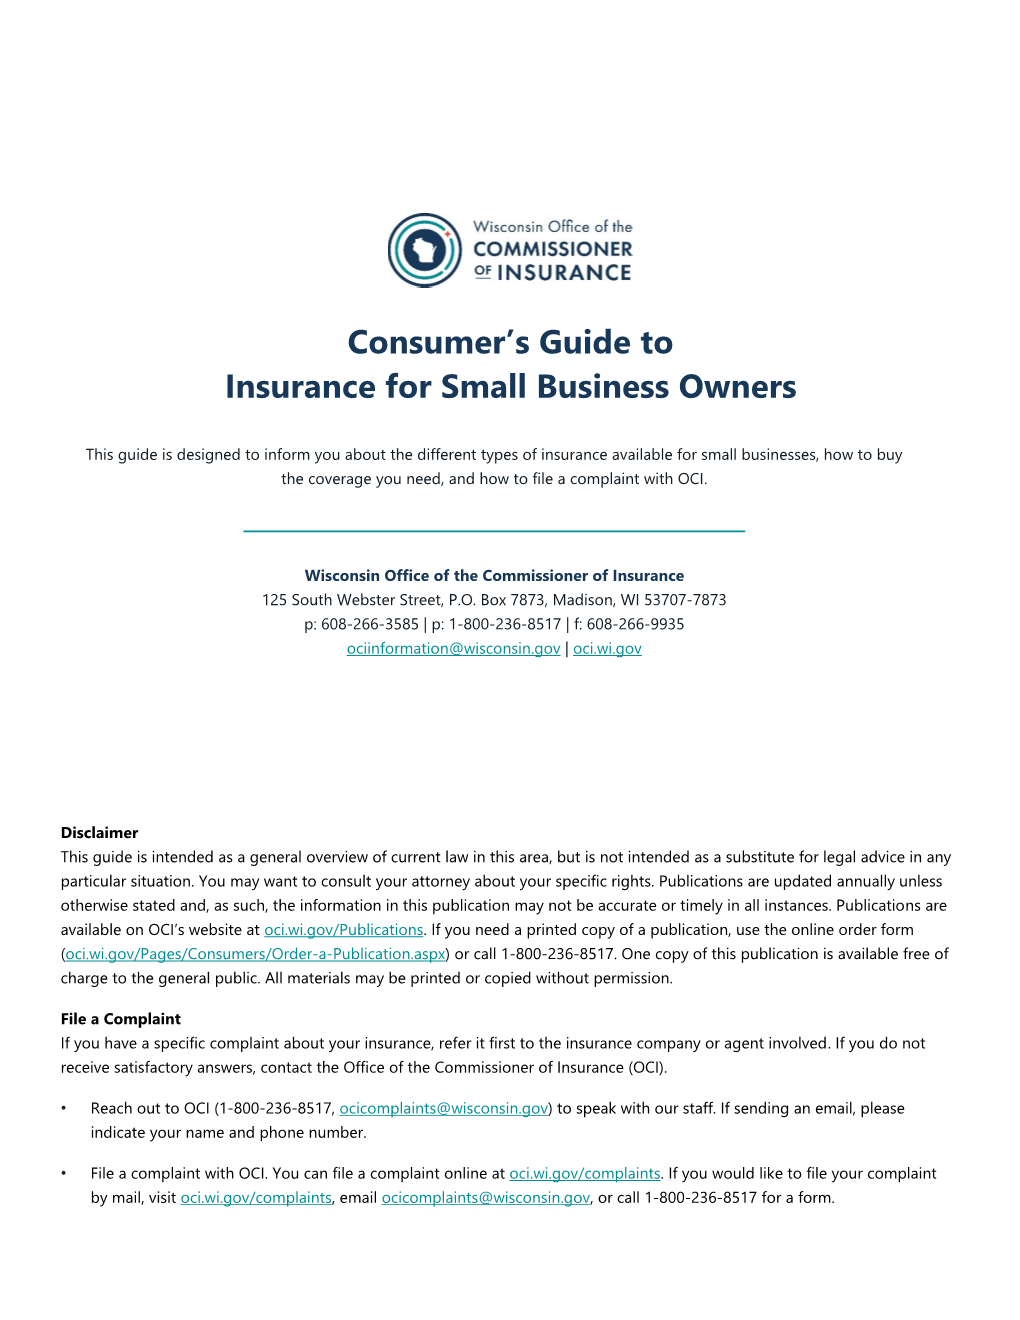 Consumer's Guide to Insurance for Small Business Owners